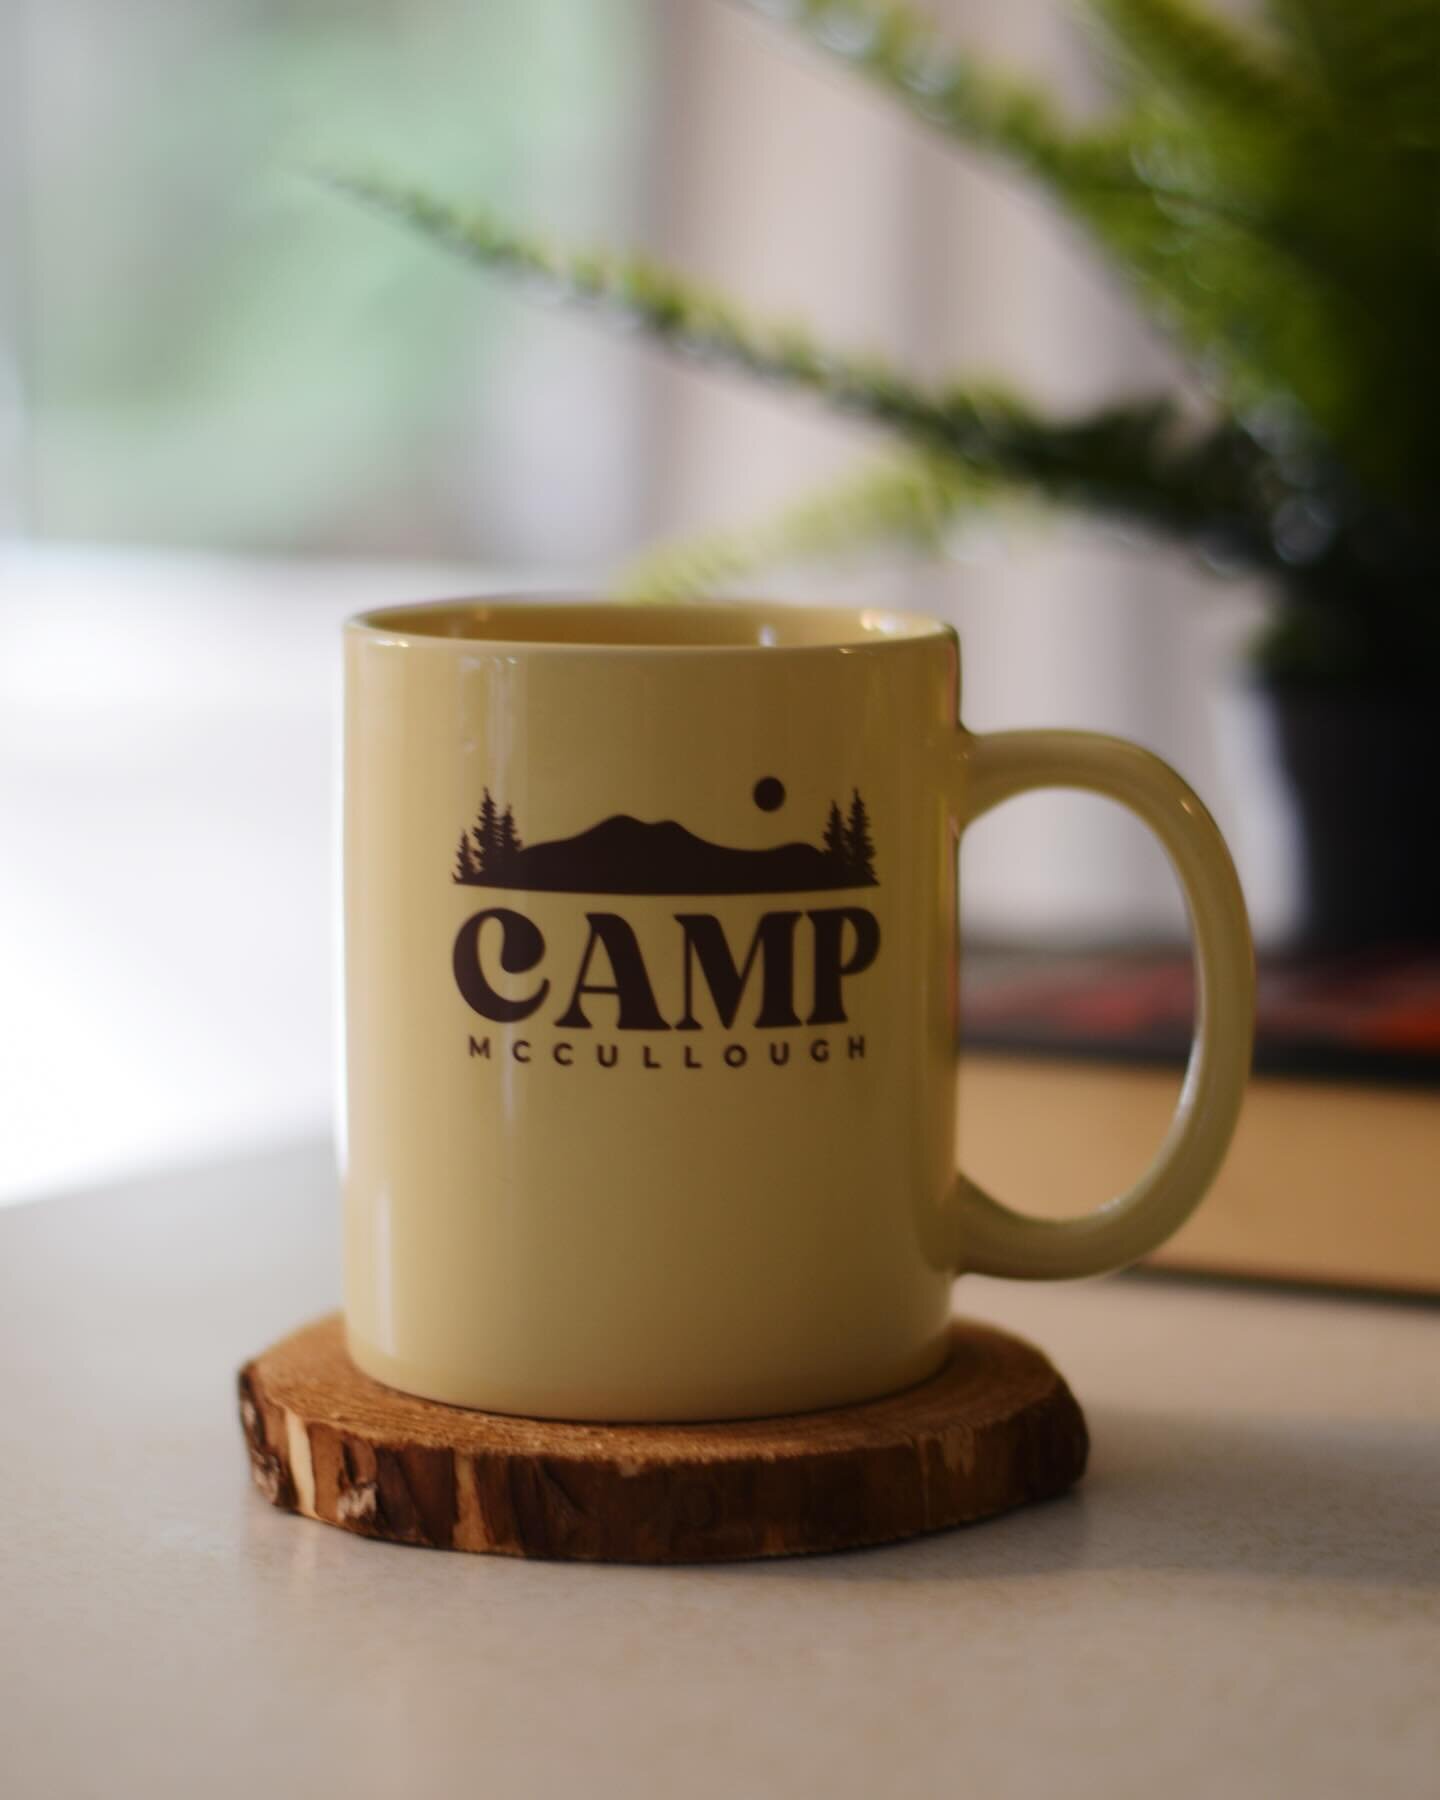 COMING SOON! New Camp McCullough mugs will be available soon on our website! May not quite be the same as sitting on the boat dock drinking coffee in the morning, but it sure will be close.